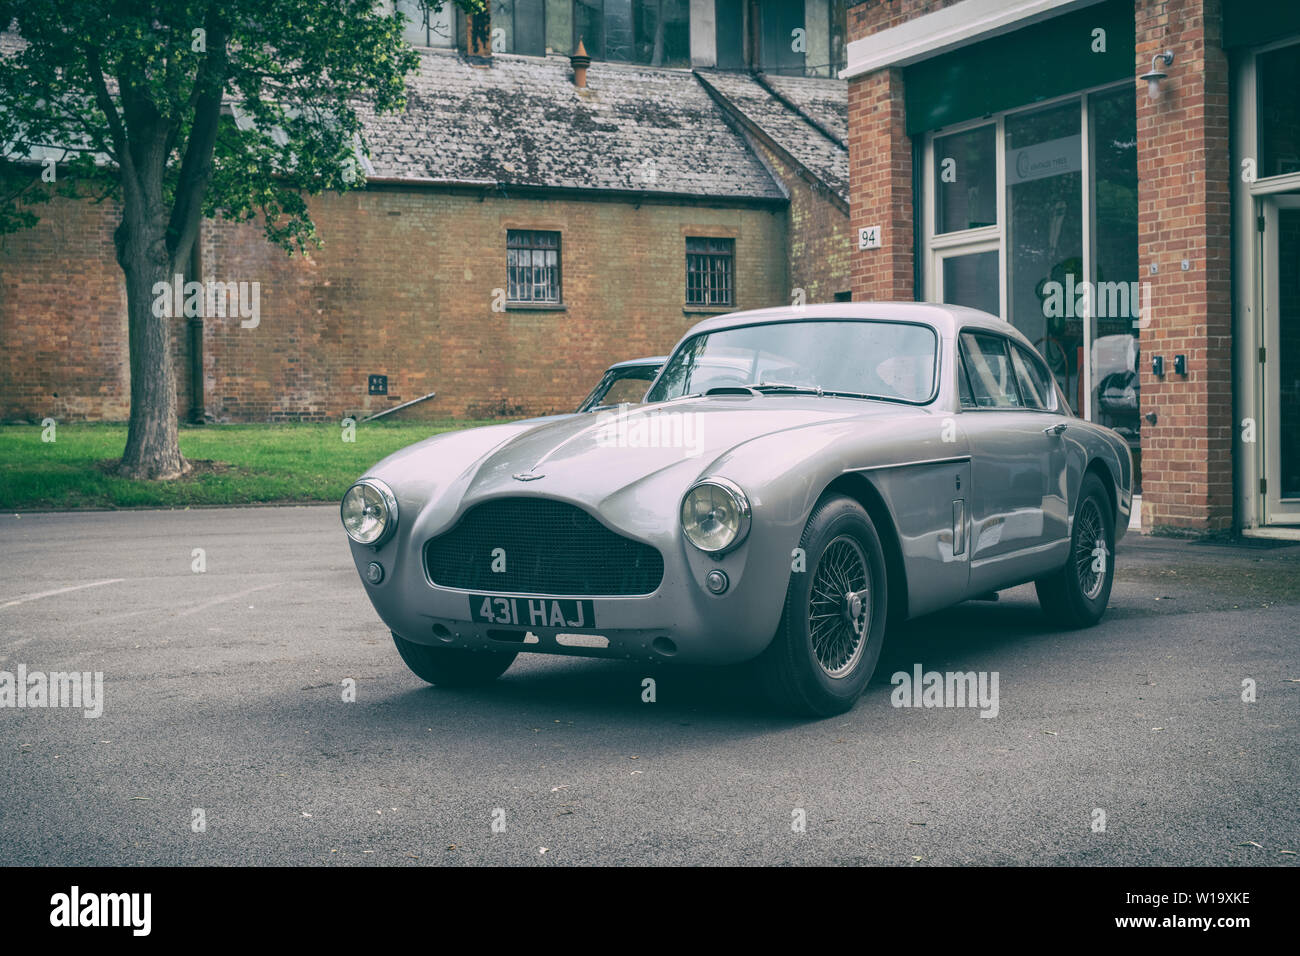 1958 Aston Martin DB2 4 Mk III at Bicester Heritage Centre super scramble event. Bicester, Oxfordshire, England. Vintage filter applied Stock Photo